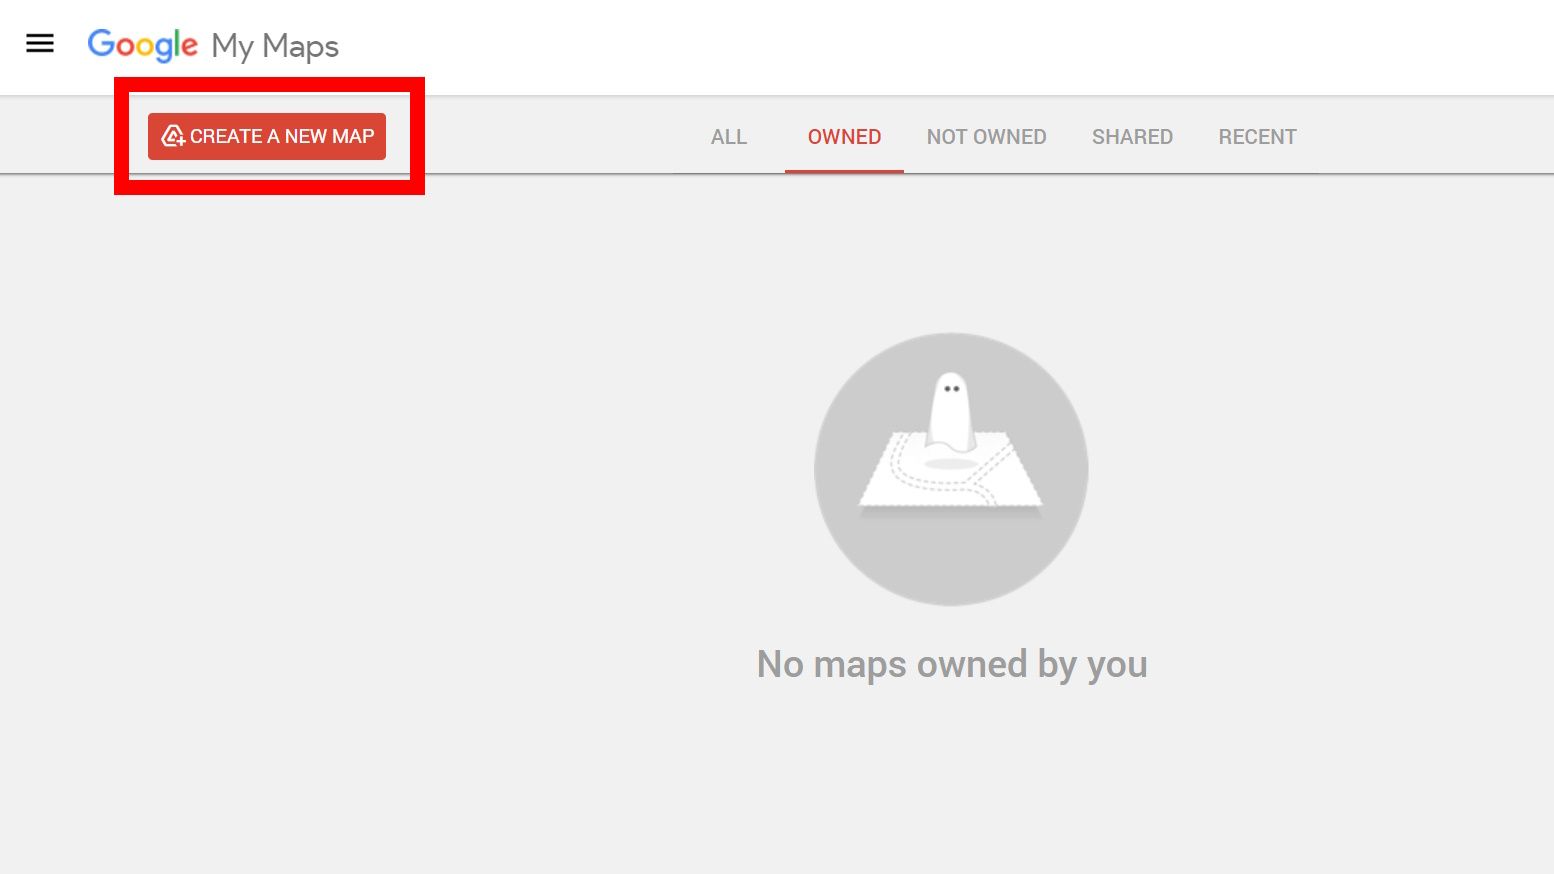 red rectangle outline over create a new map button in Google My Maps